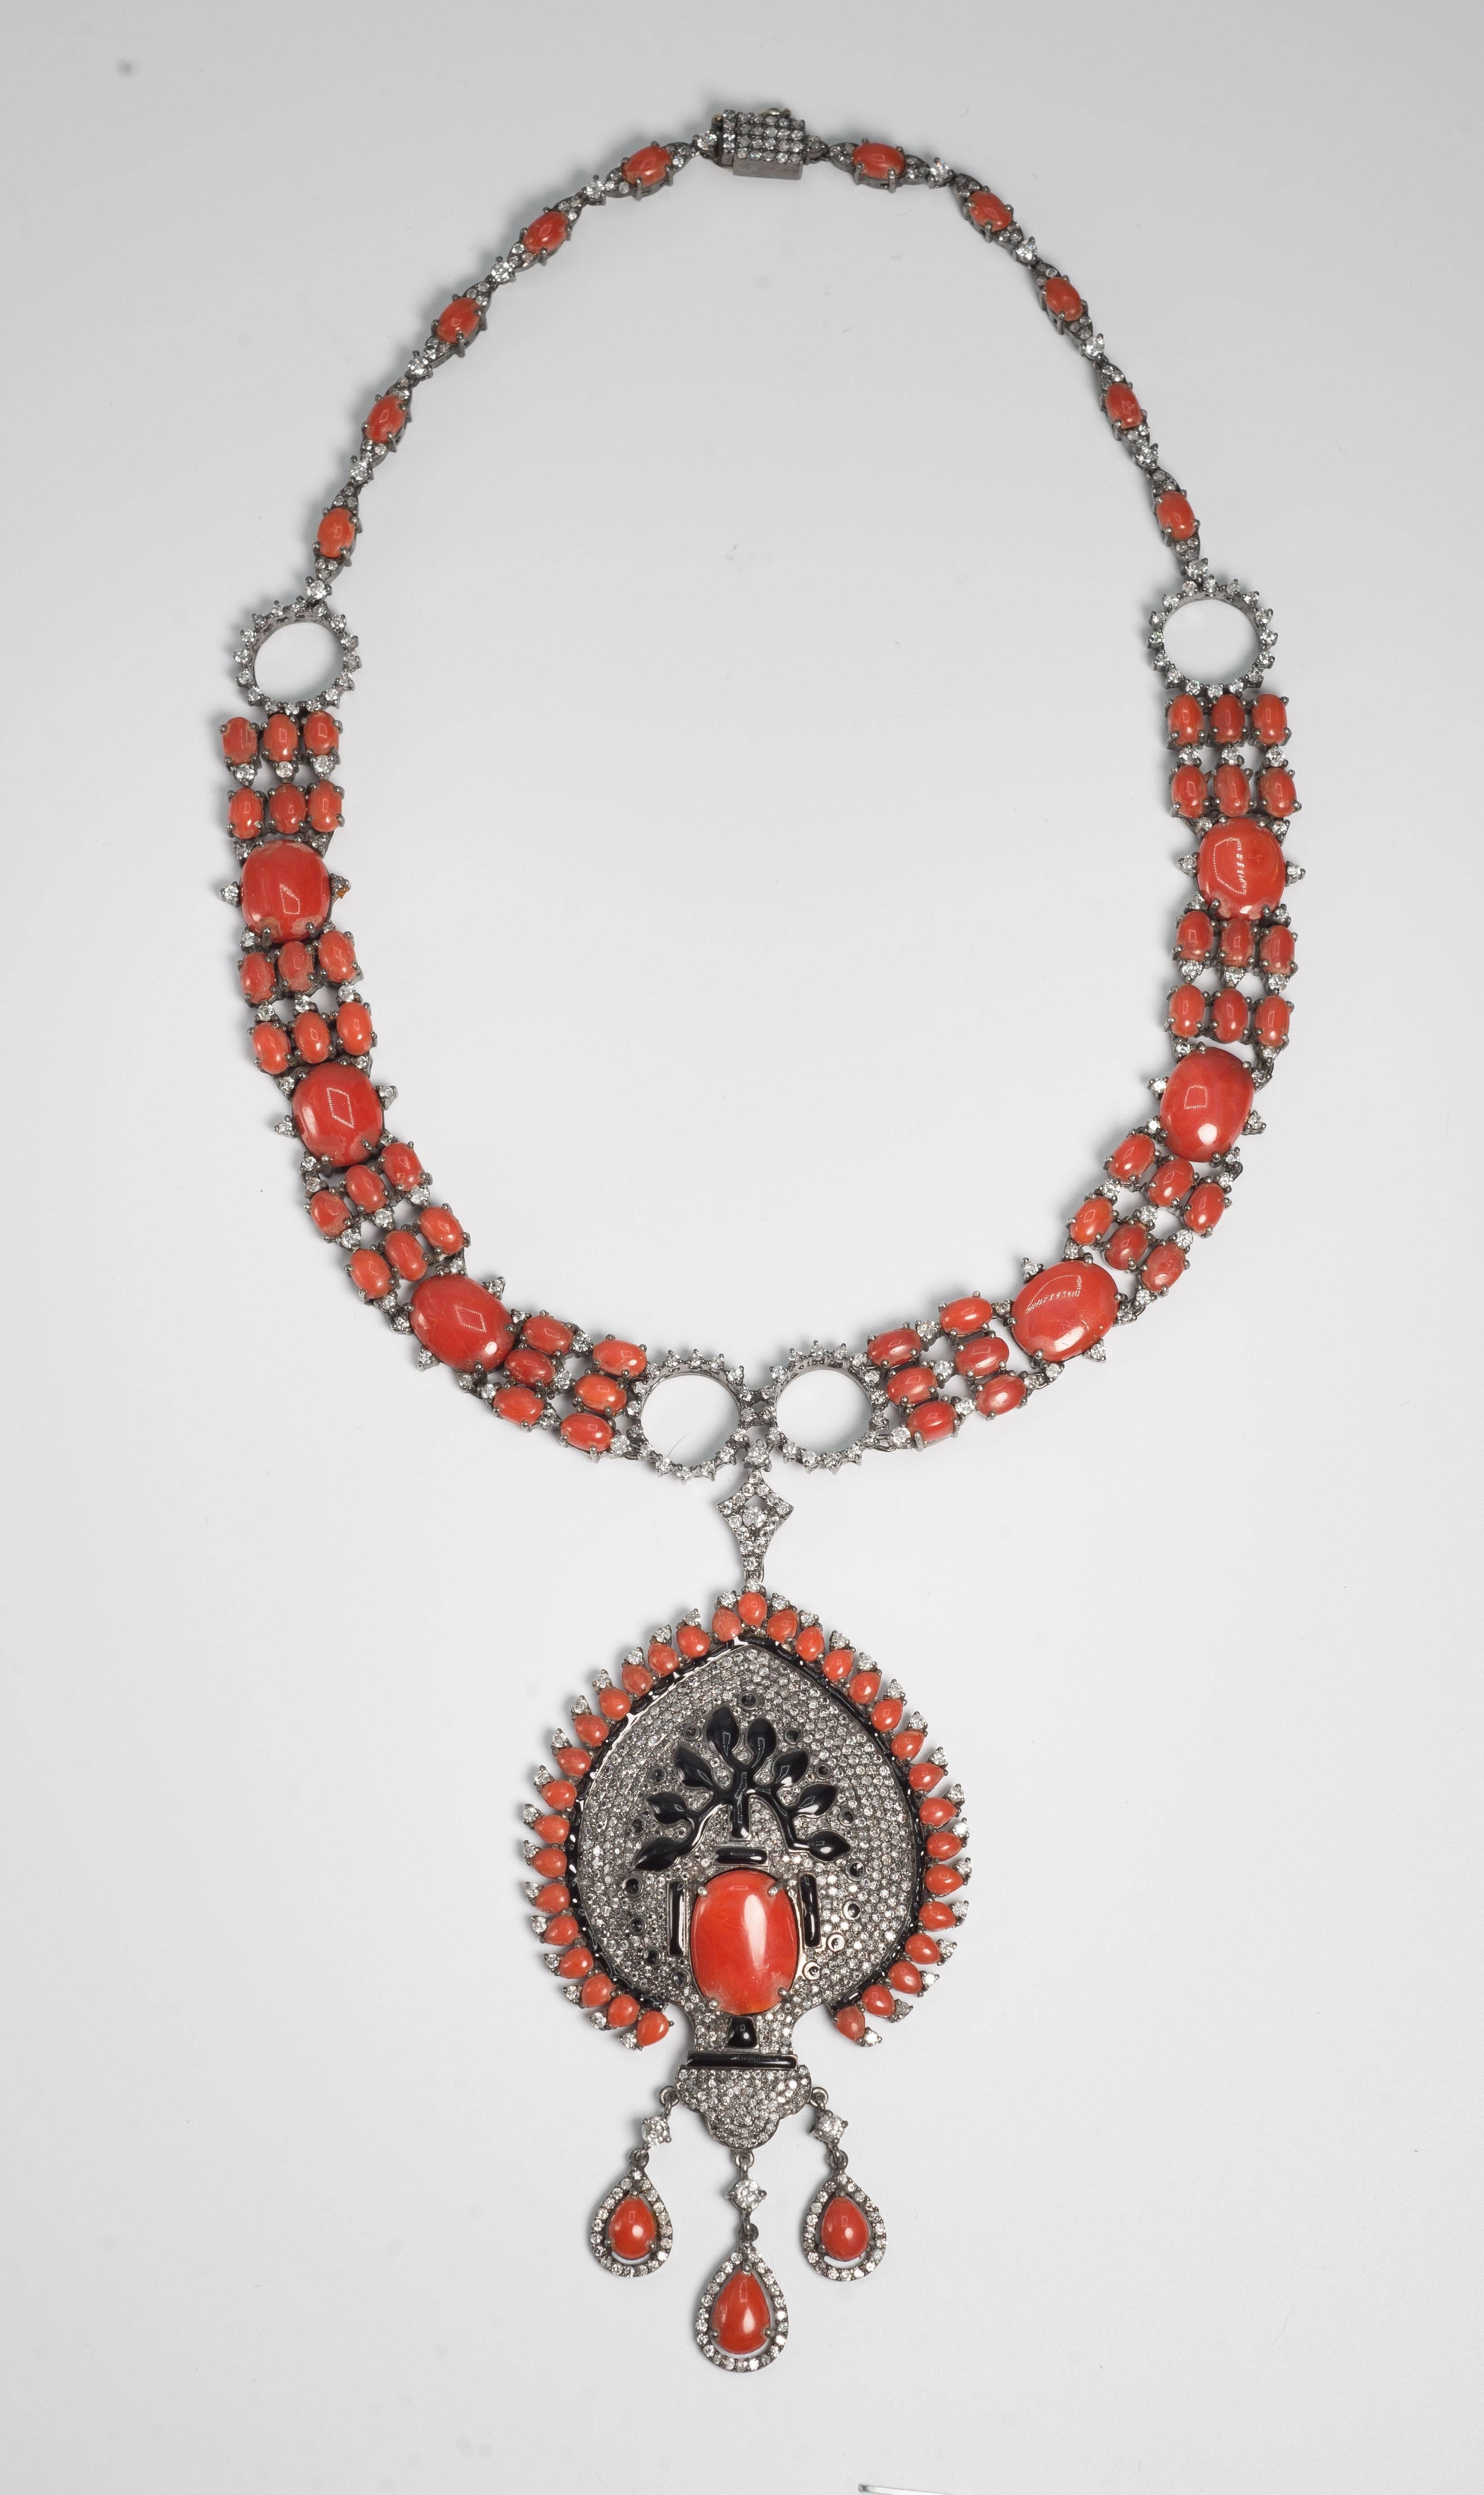 Exquisite modern Art Deco  Tree Of Life design diamond coral cabochon black onyx pendant necklace.
The corals are a beautiful deep orange color, the diamonds are micro pave in antiqued sterling and the necklace is light and flexible with all